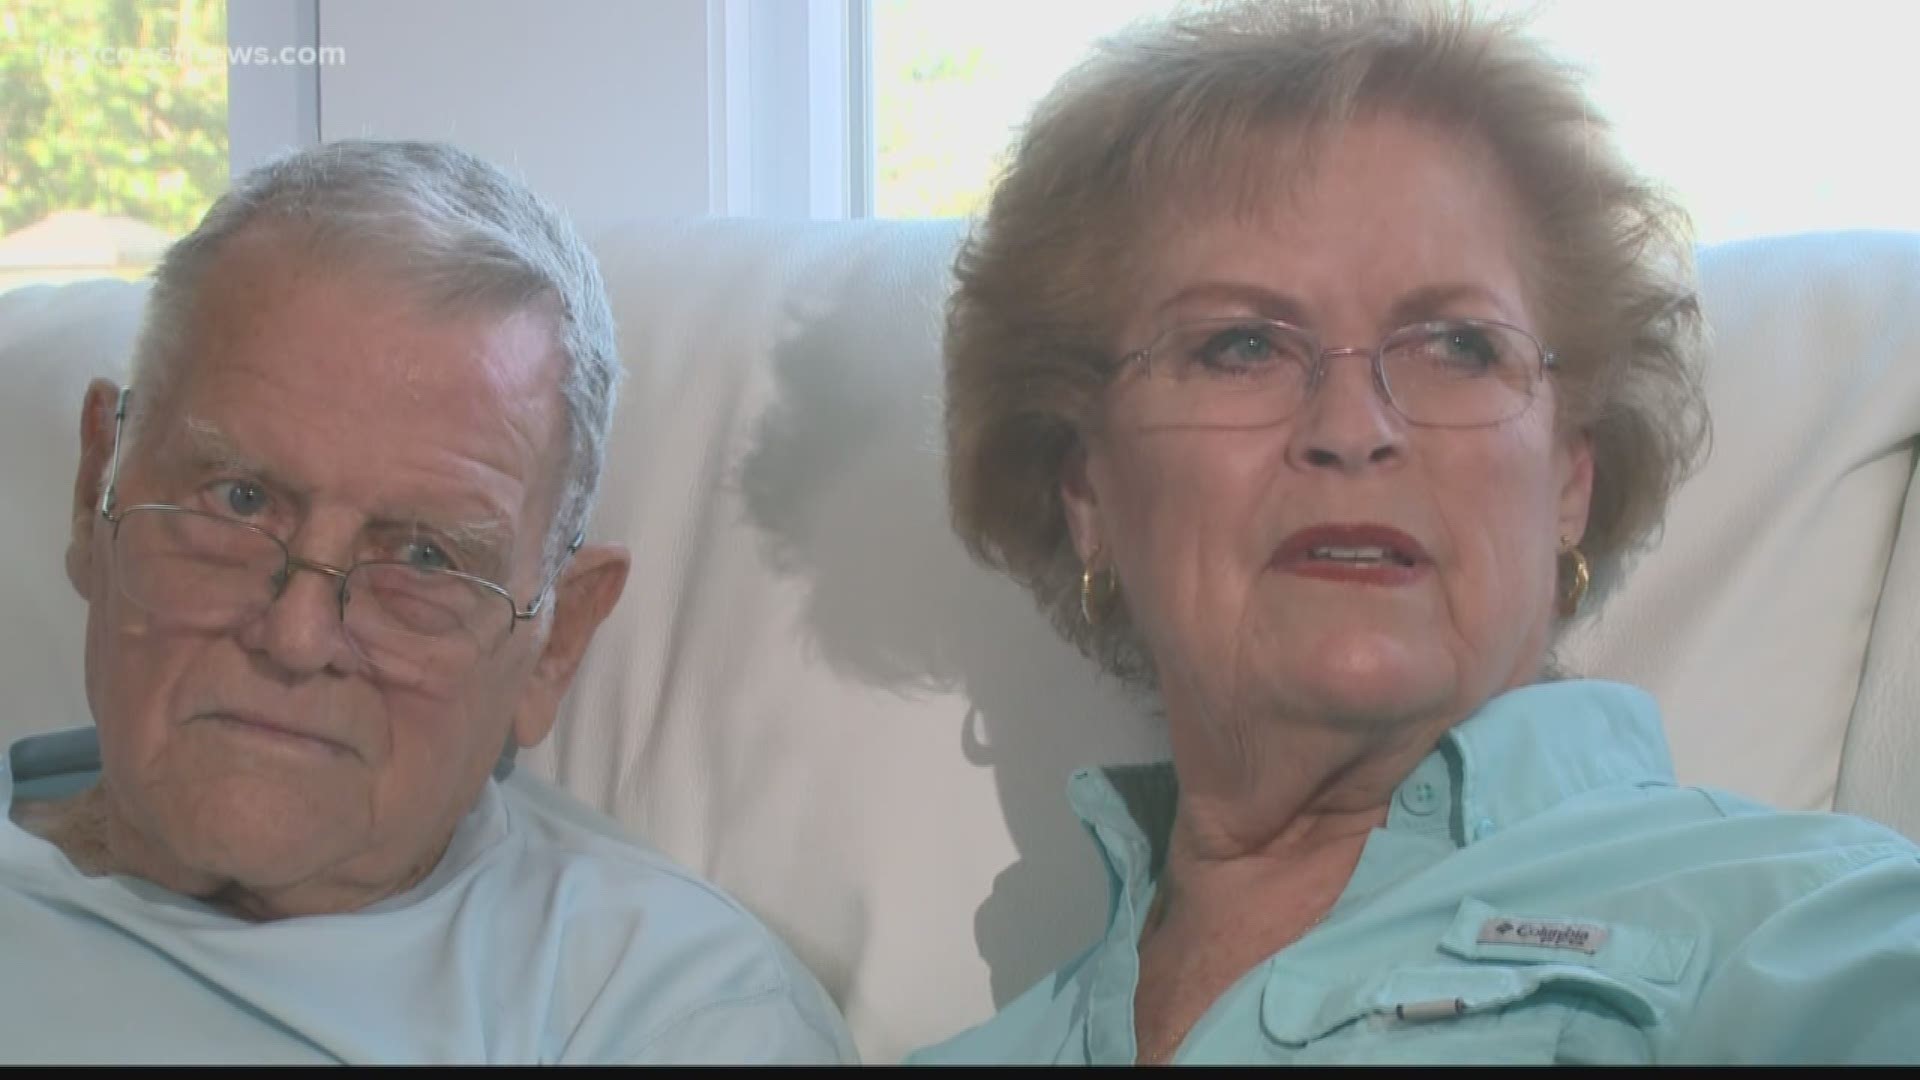 A Jacksonville native is in the middle of a long fight with West Nile virus. Dave Workman Sr. leads an active life with his wife Melissa. His life was turned upside down shortly after a boat trip on the St. John?s River two months ago.